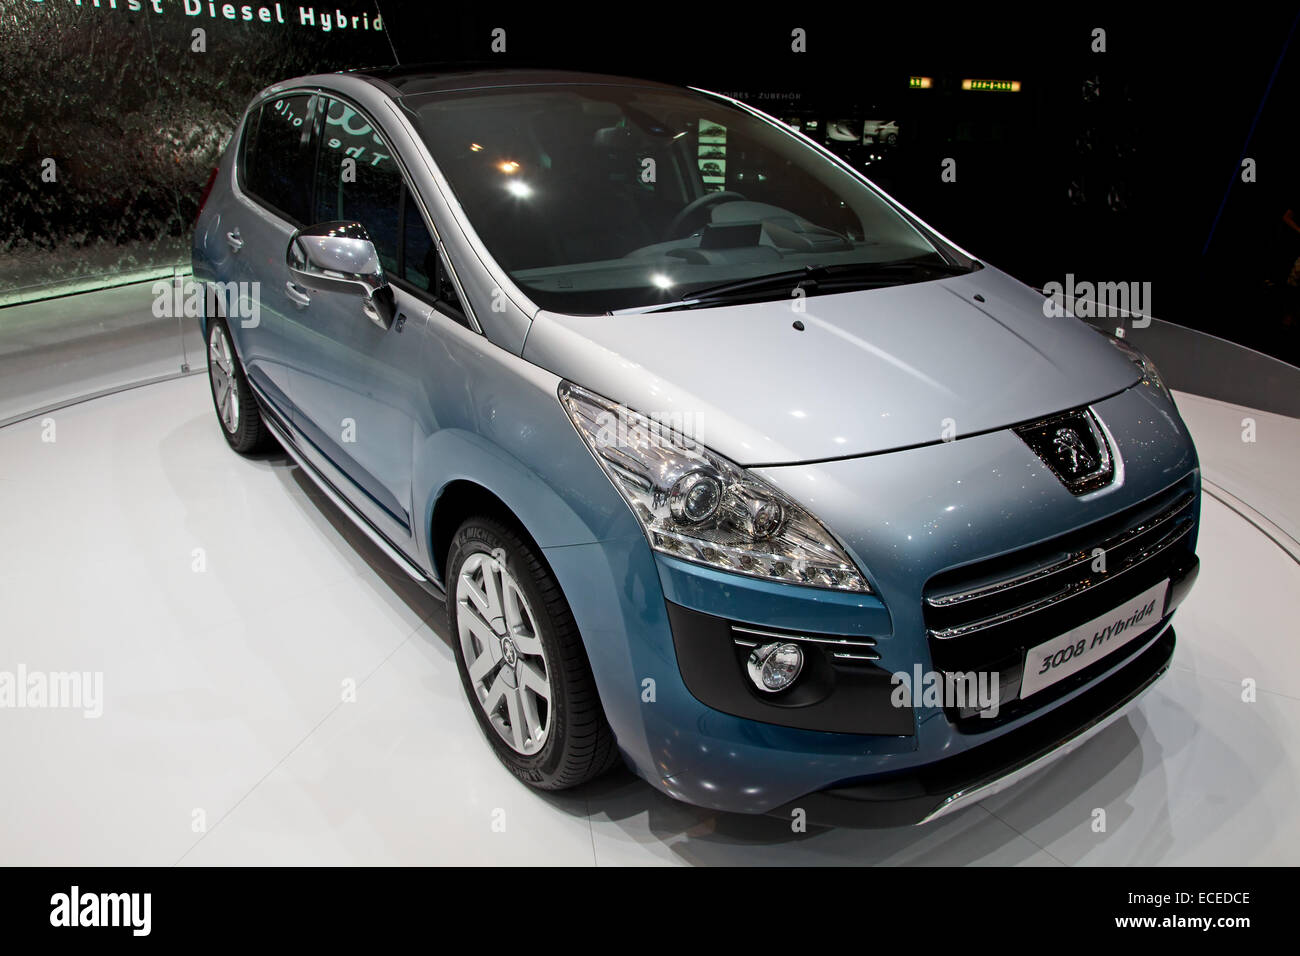 https://c8.alamy.com/comp/ECEDCE/geneva-march-8-the-peugeot-3008-hybrid-car-on-display-at-the-81st-ECEDCE.jpg